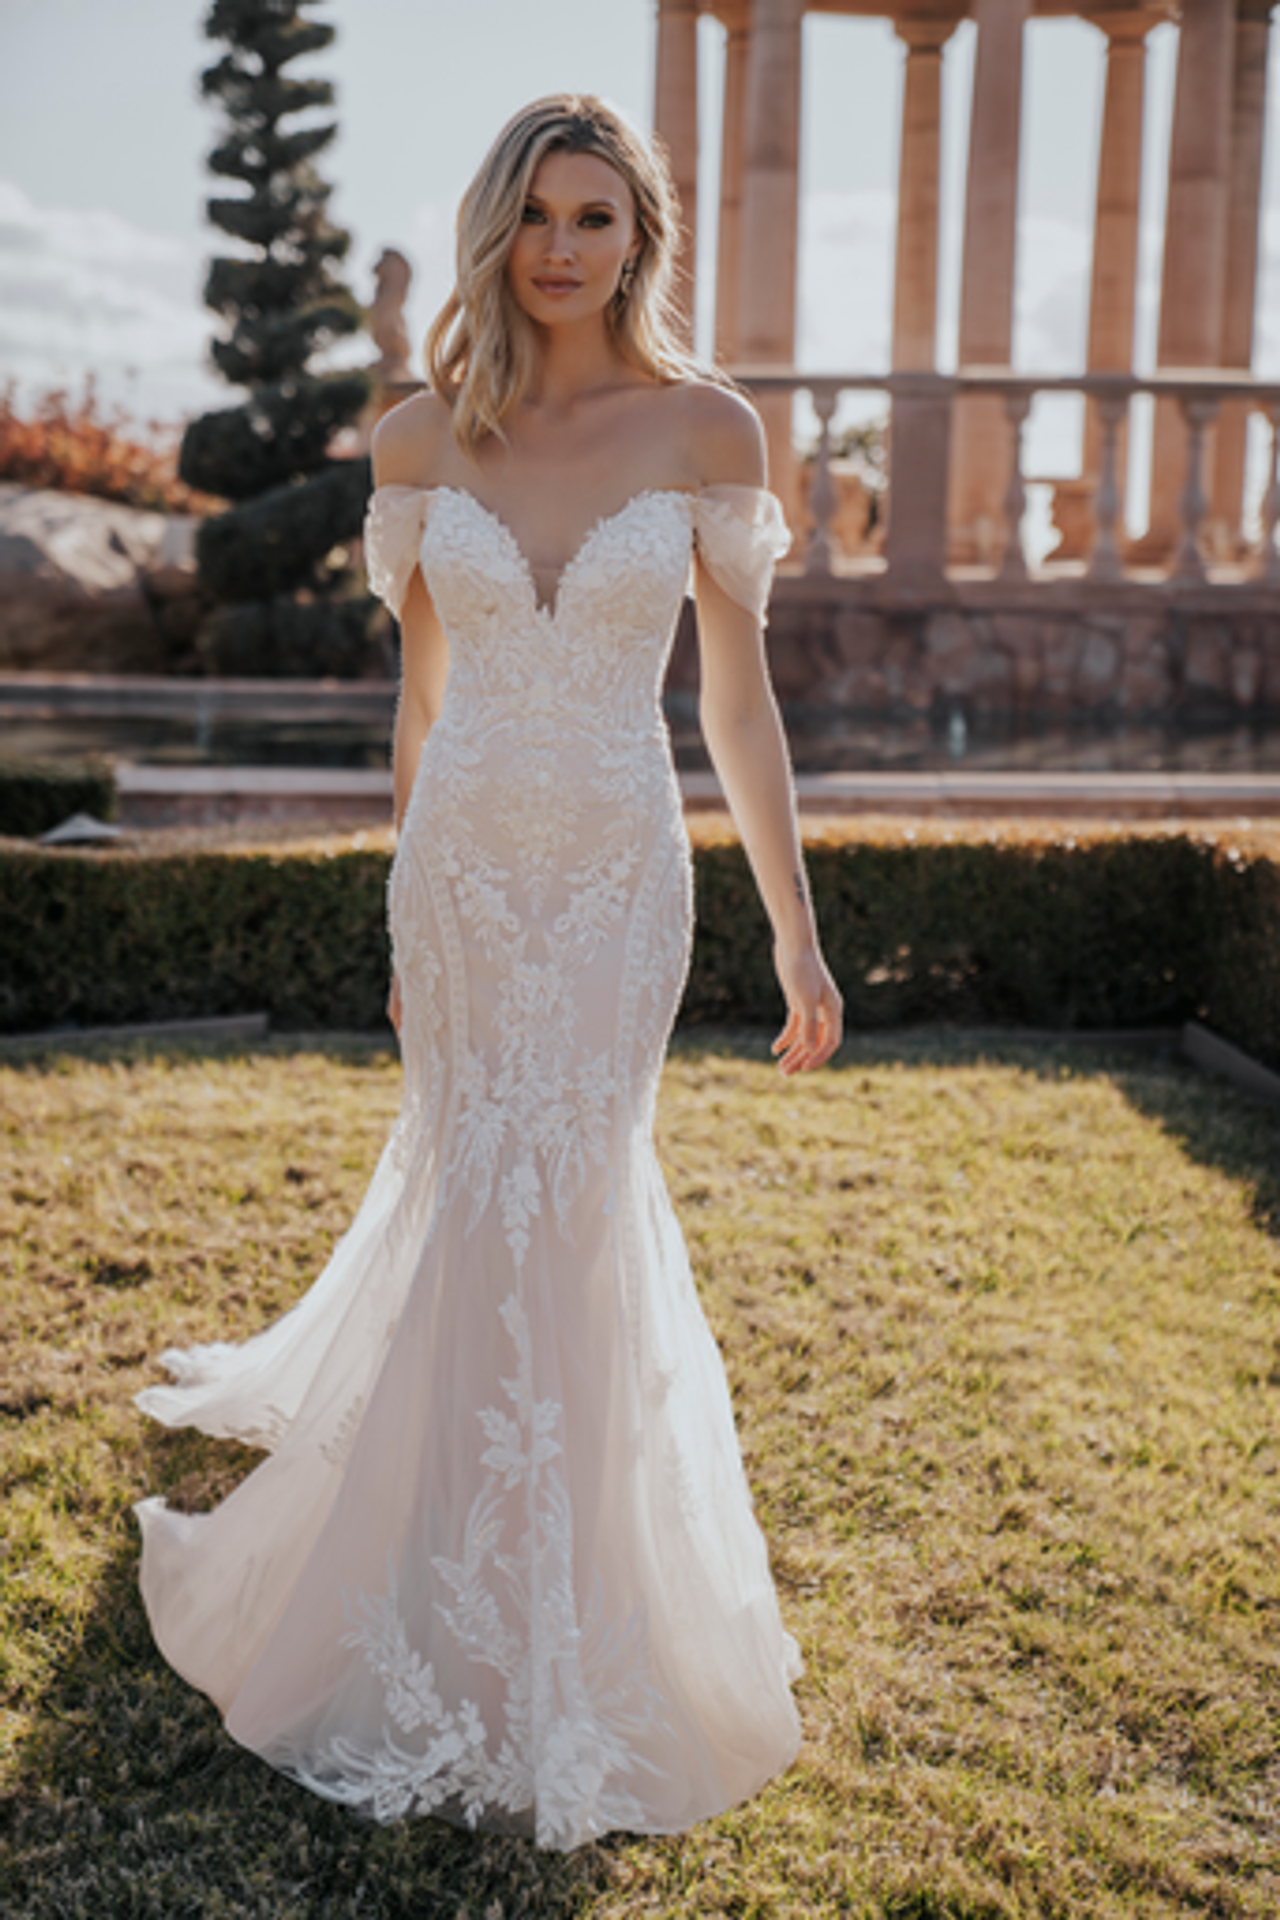 Curve-hugging Sequined Off-the-shoulder Gown by Allure Bridals - Image 1